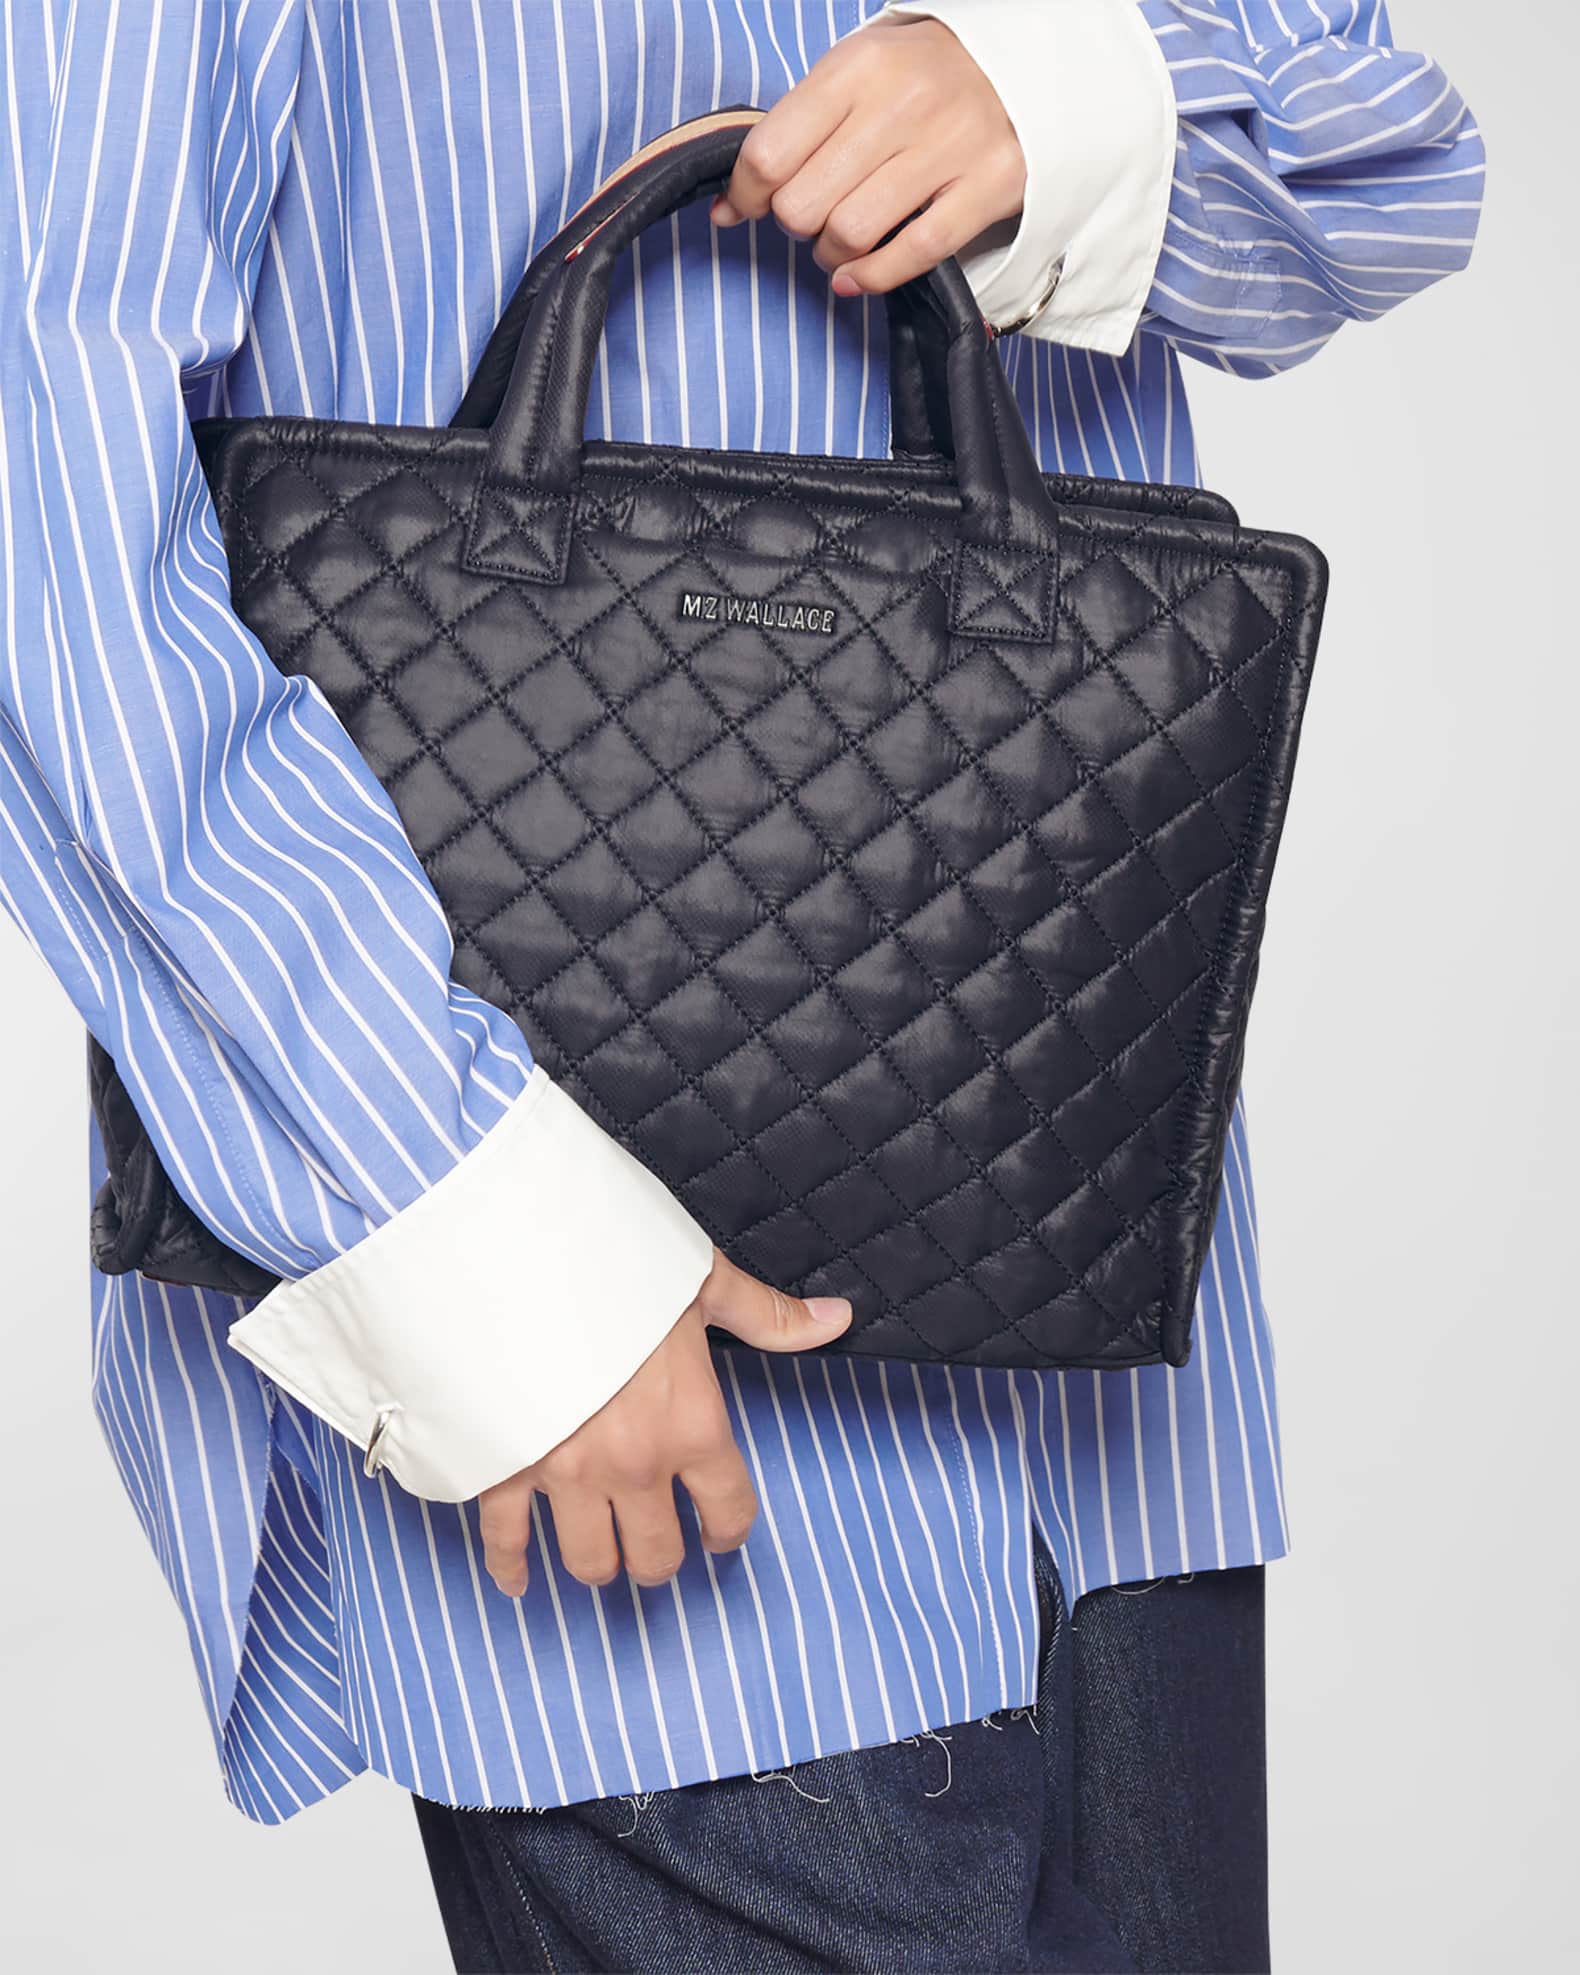 MZ WALLACE Medium Box Quilted Nylon Tote Bag | Neiman Marcus